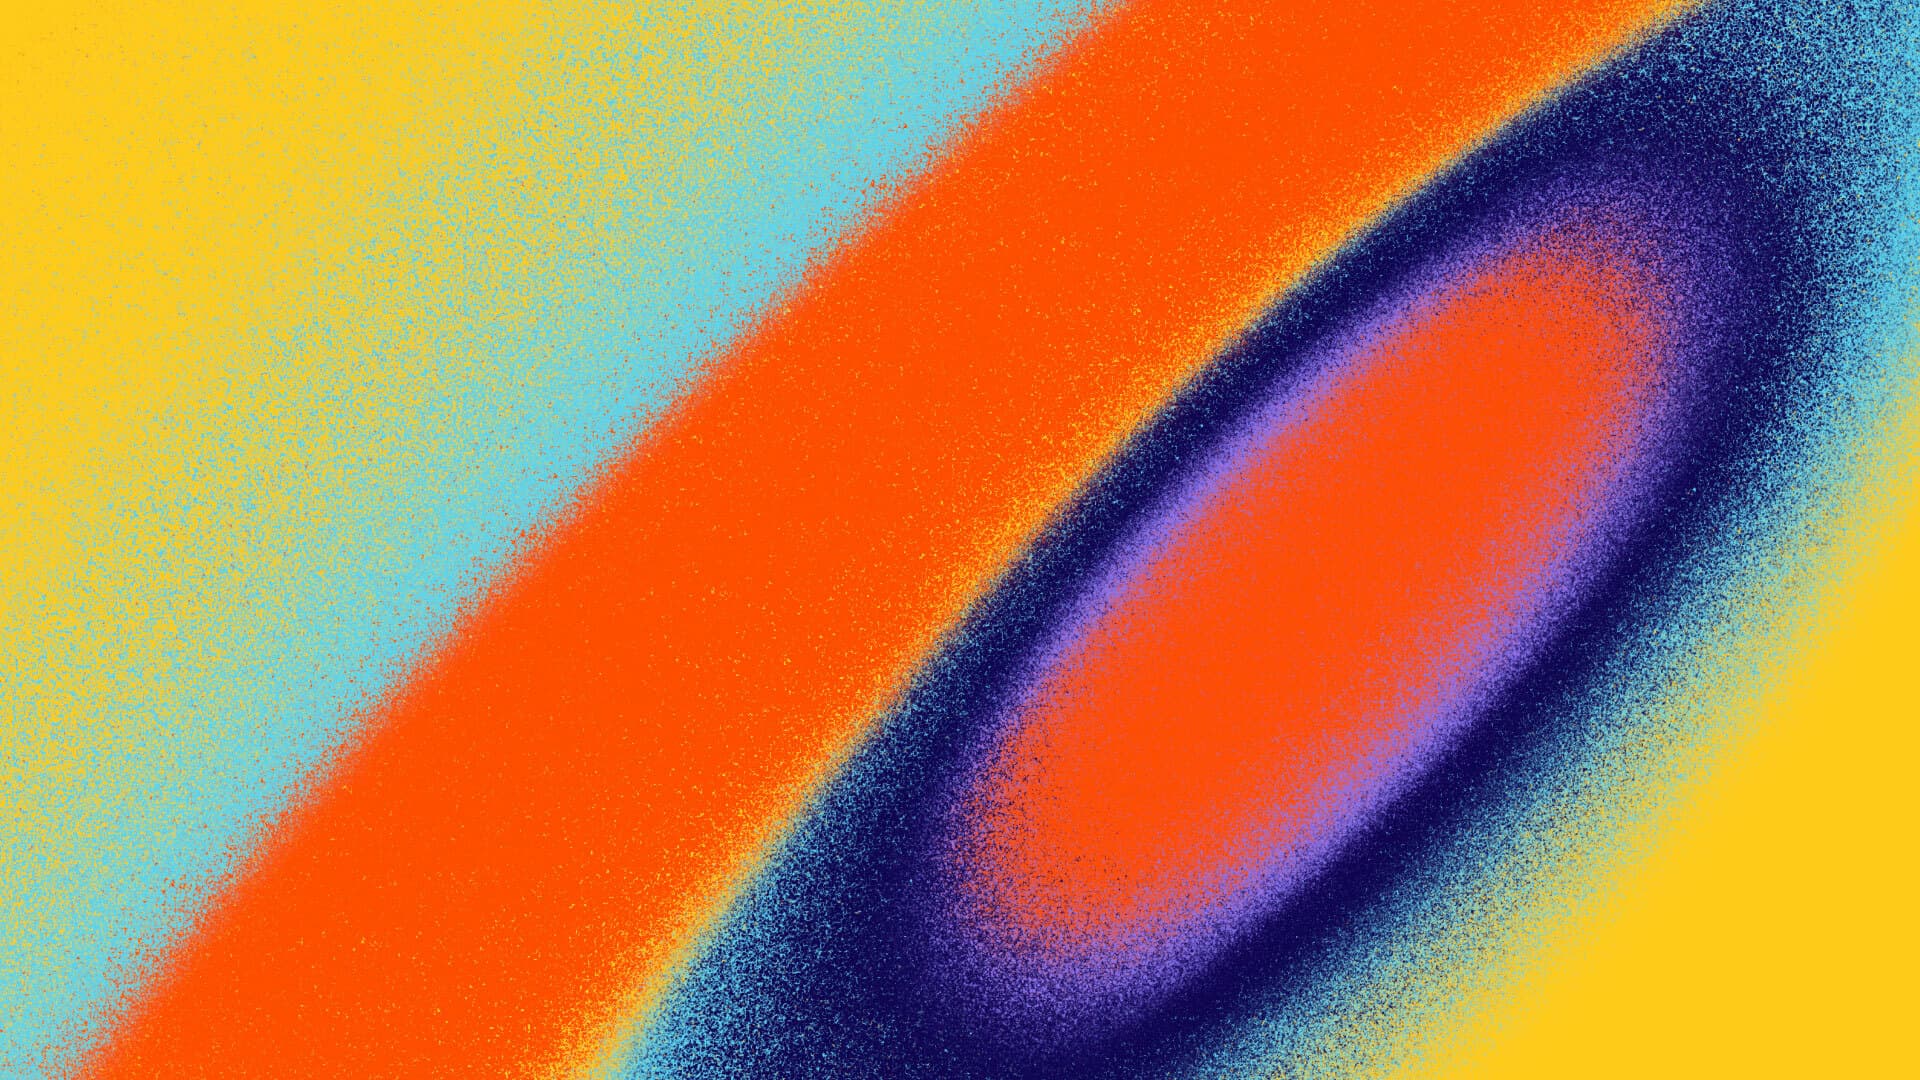 Abstract digital artwork featuring a gradient of warm and cool colors. A large oval shape transitions from bright red at the center to deep blue on the edges. Surrounding areas include a blend of vibrant yellow, orange, blue, and green hues.